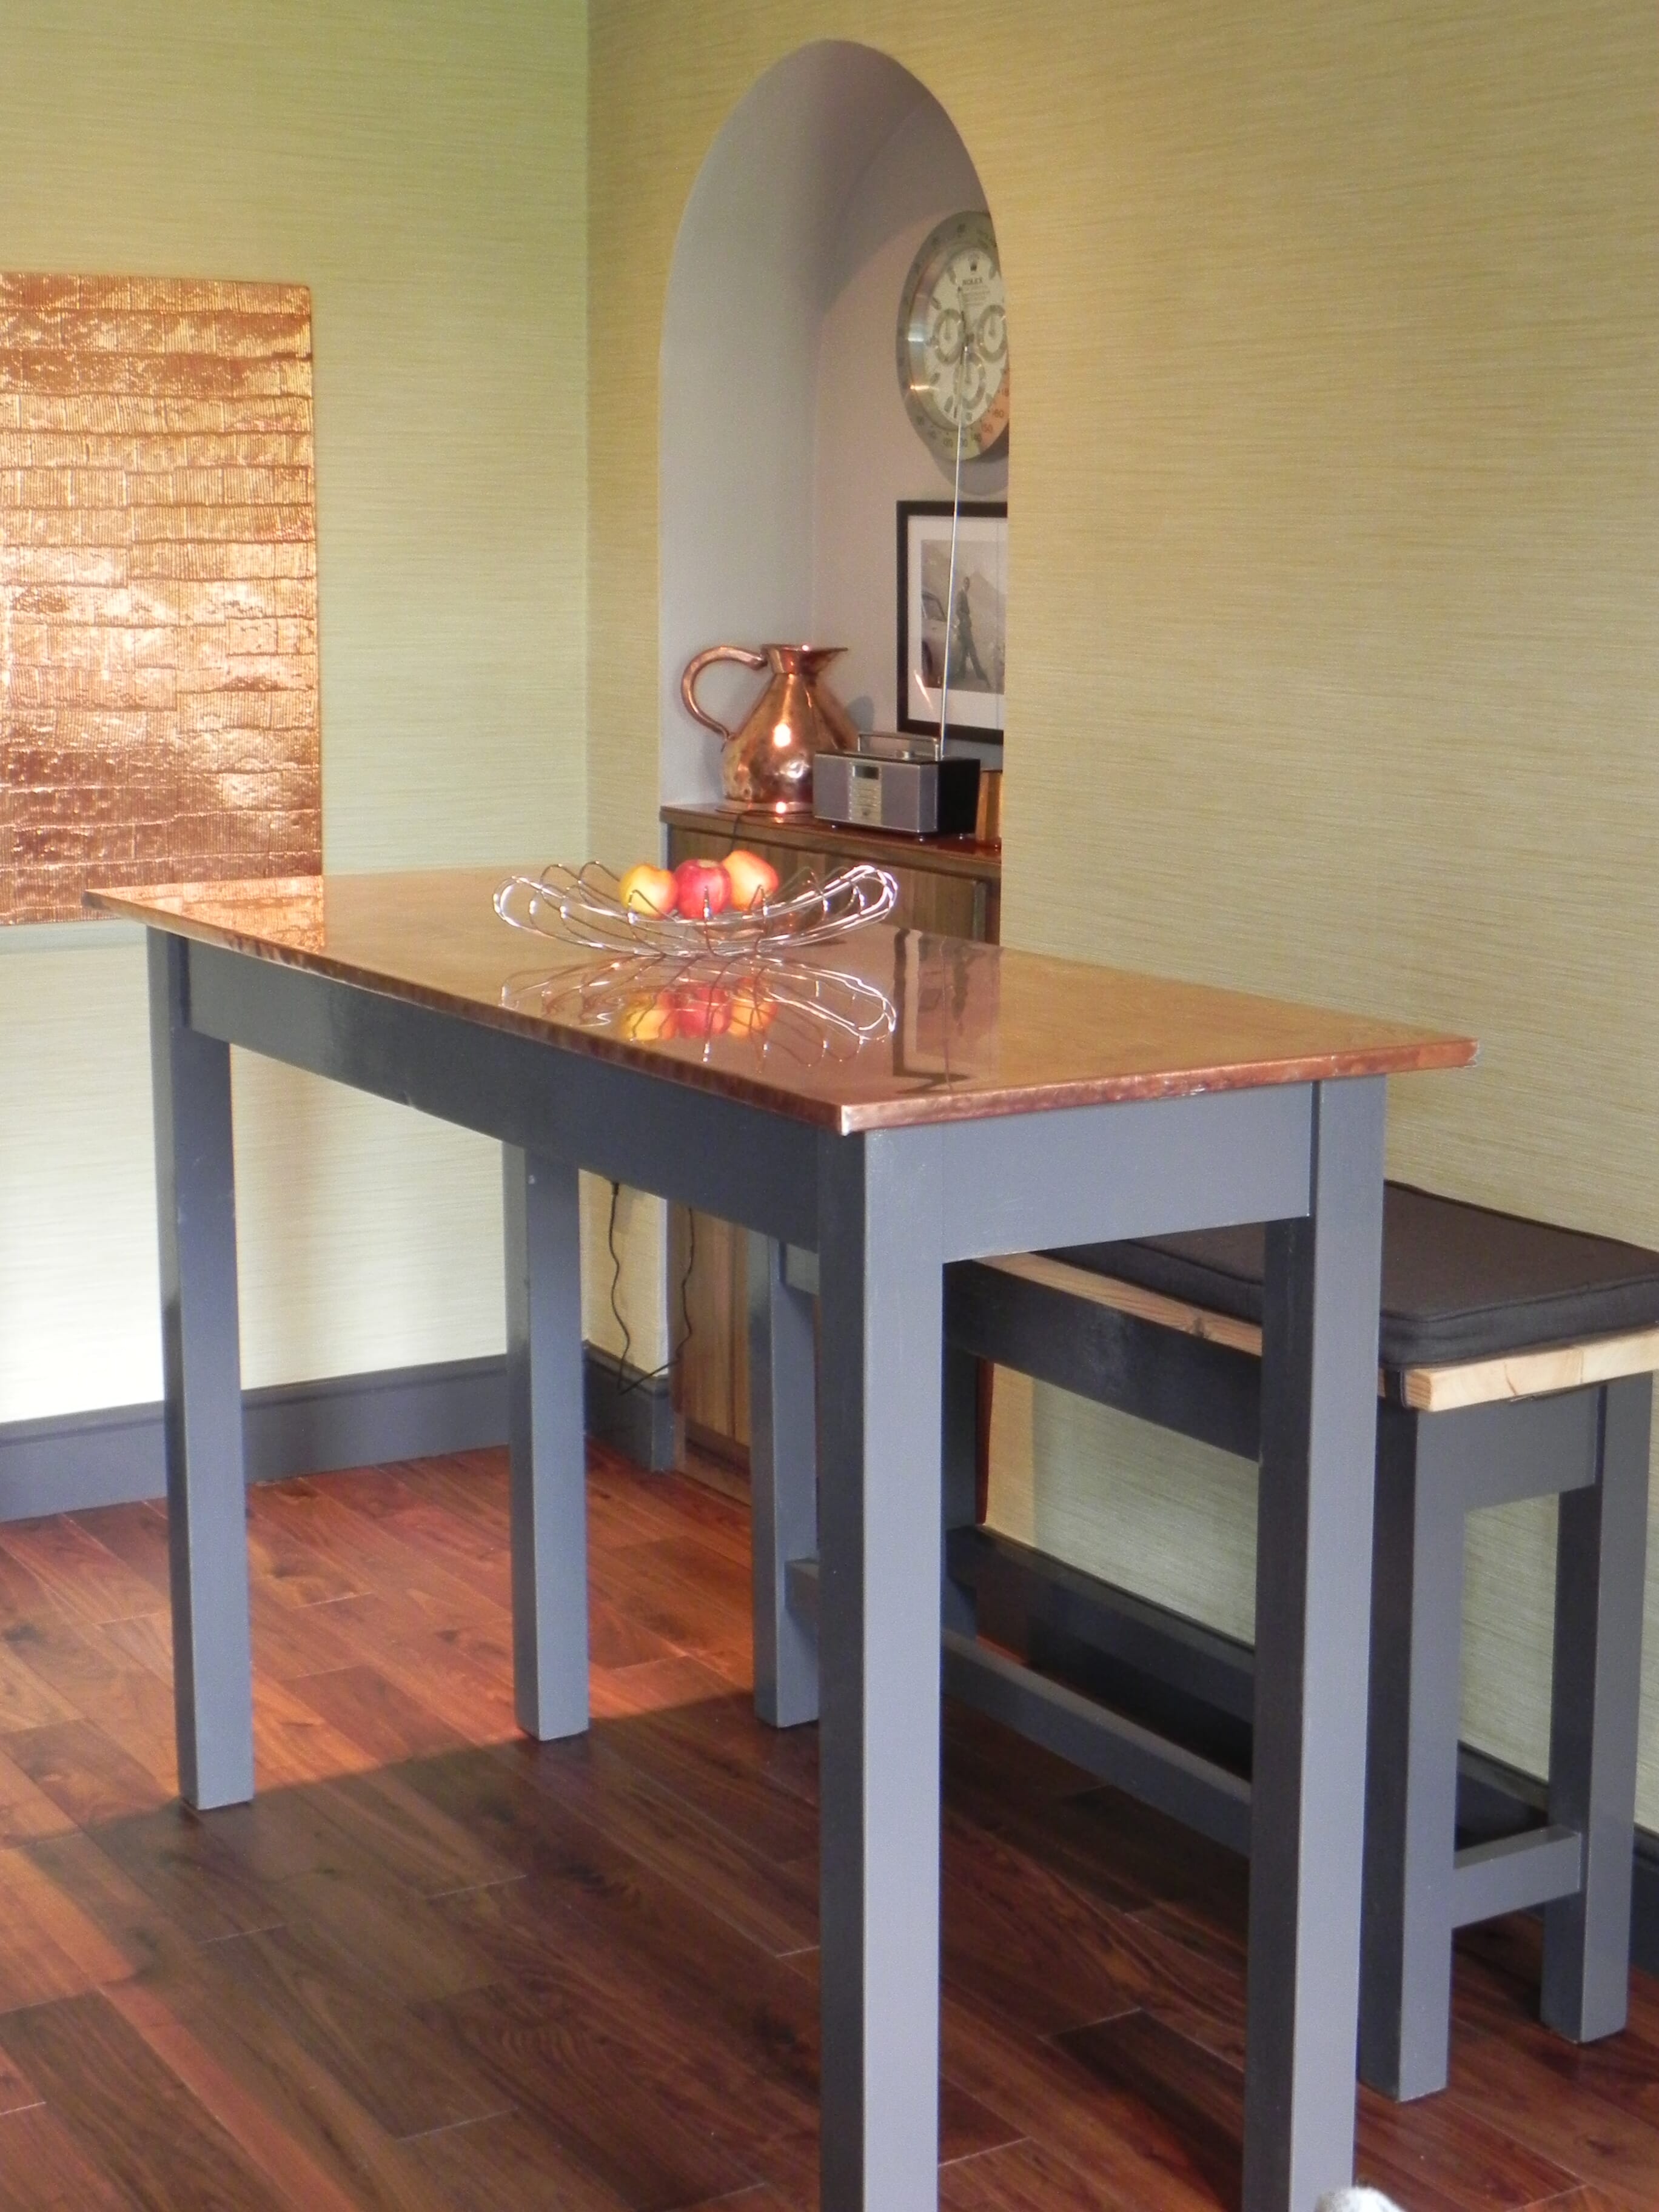 Copper Table Made At UKAA